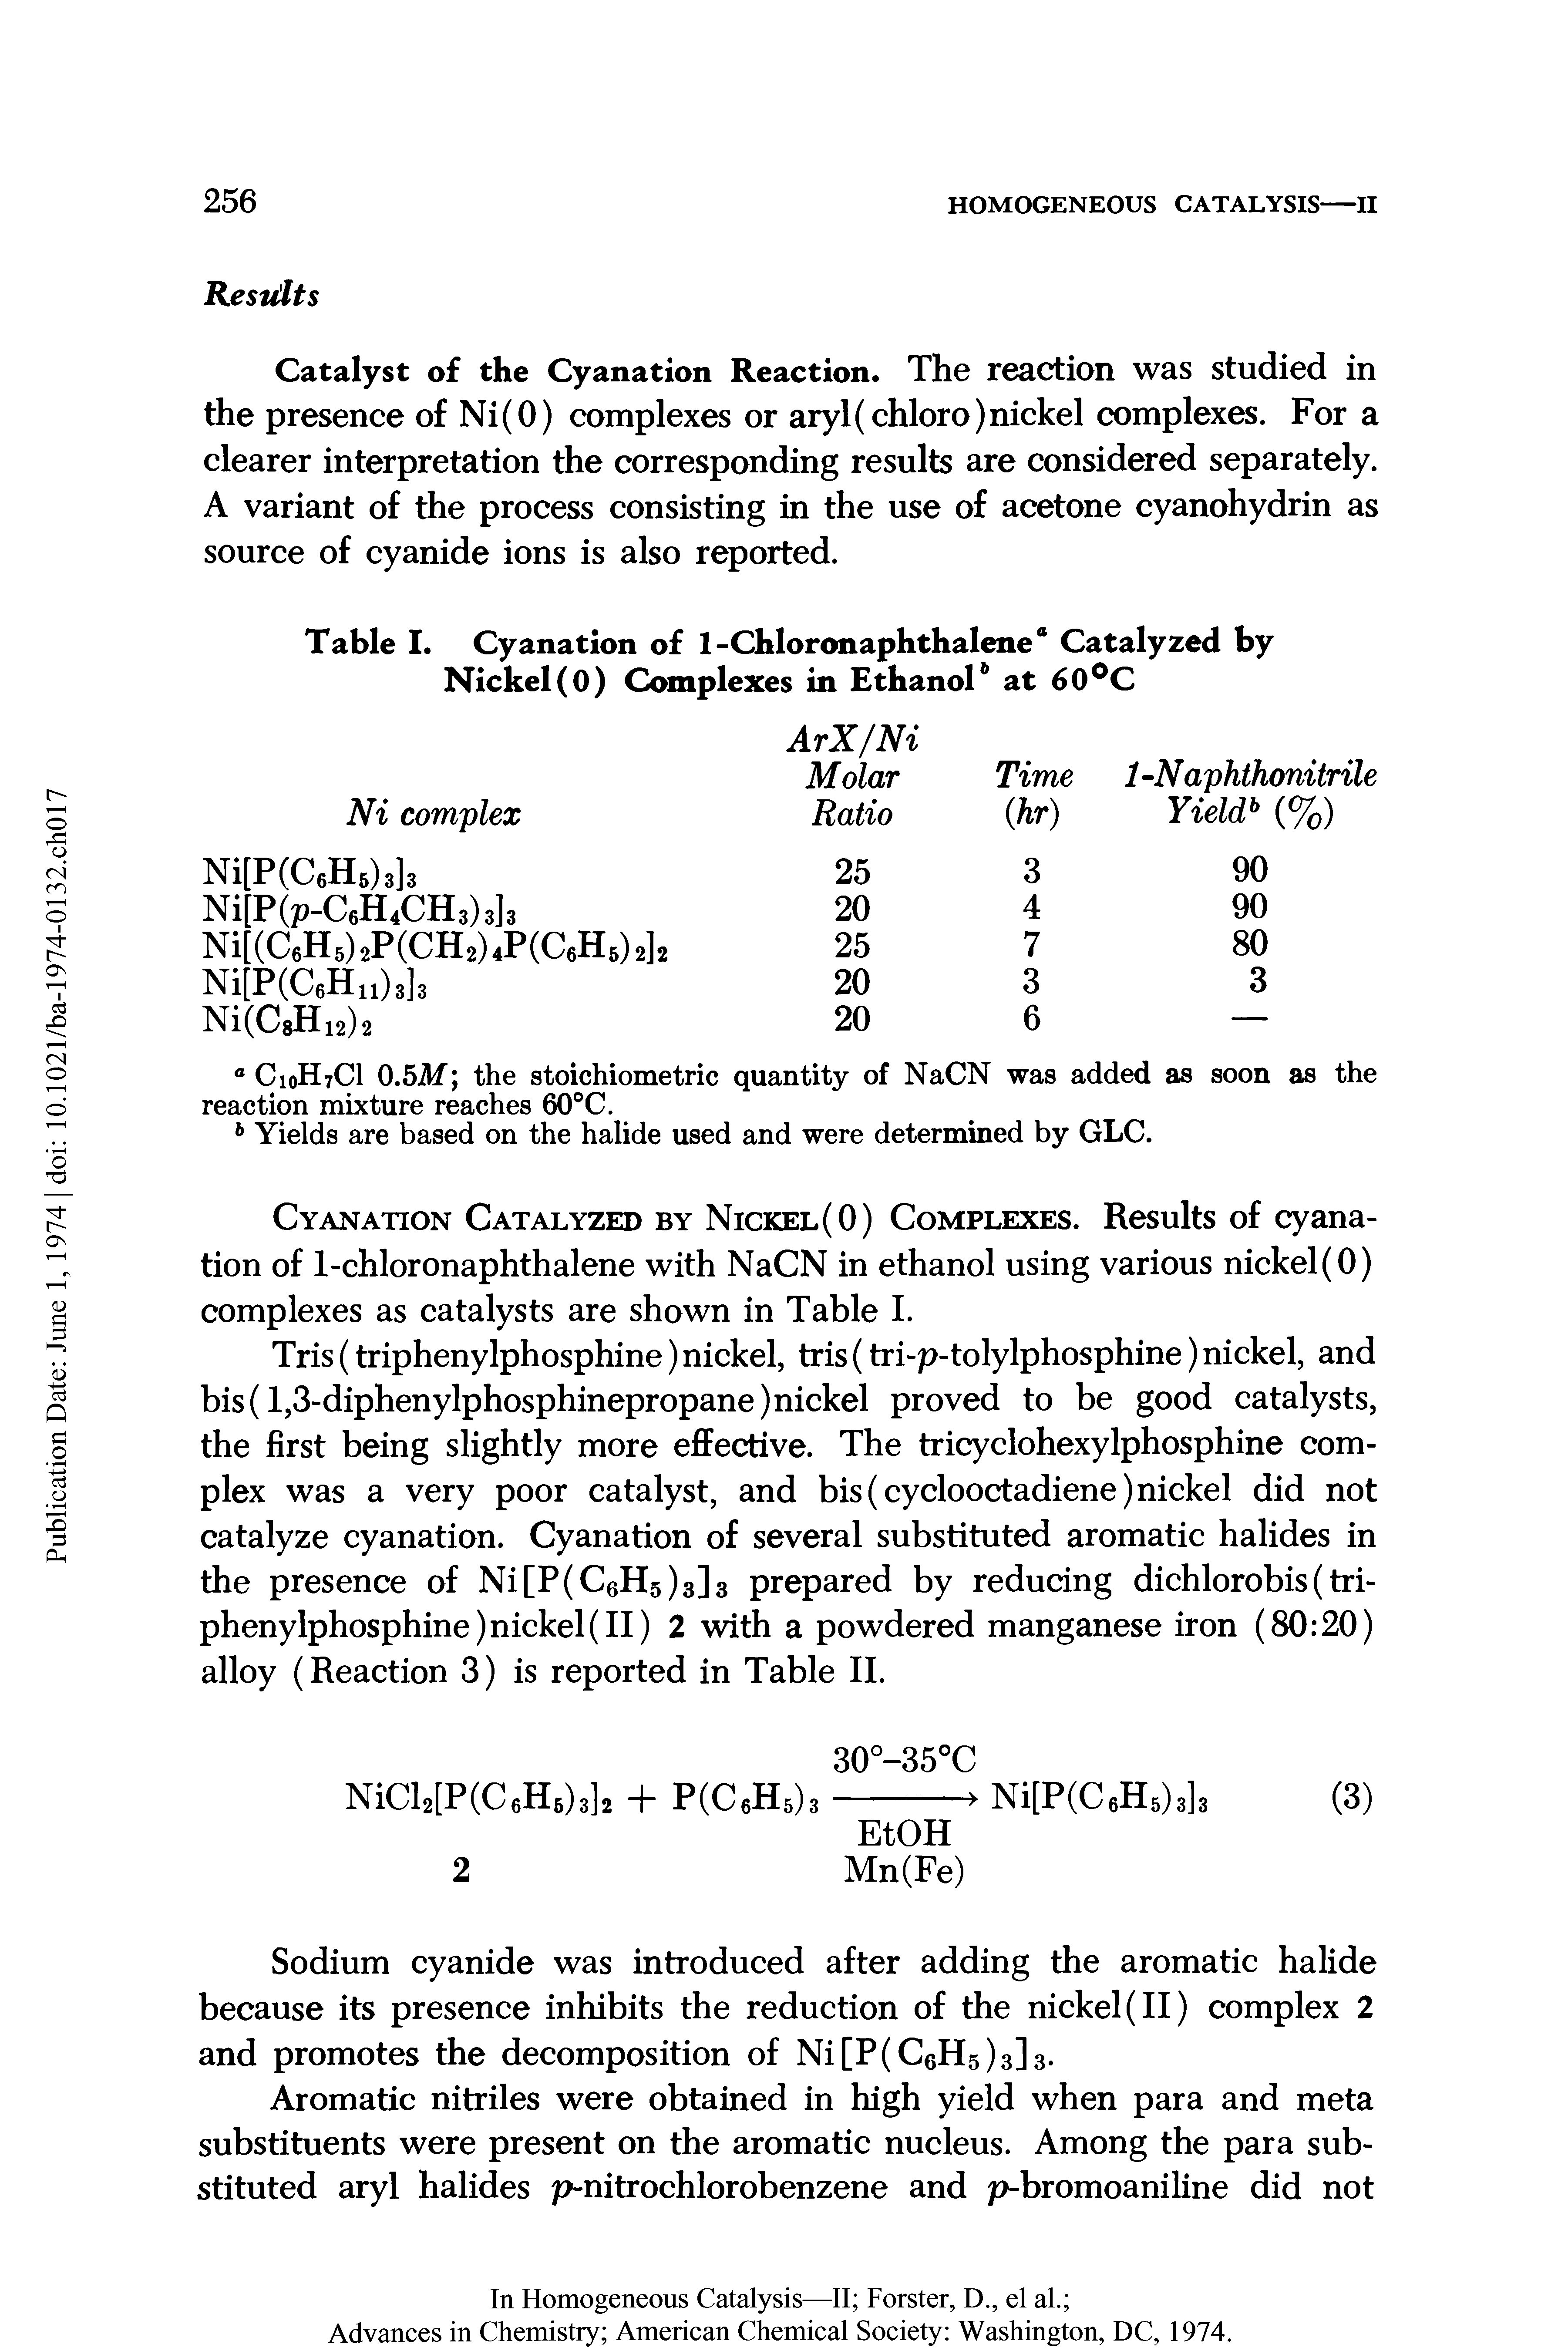 Table I. Cyanation of l-Chloronaphthalene° Catalyzed by Nickel(0) Complexes in Ethanol6 at 60°C...